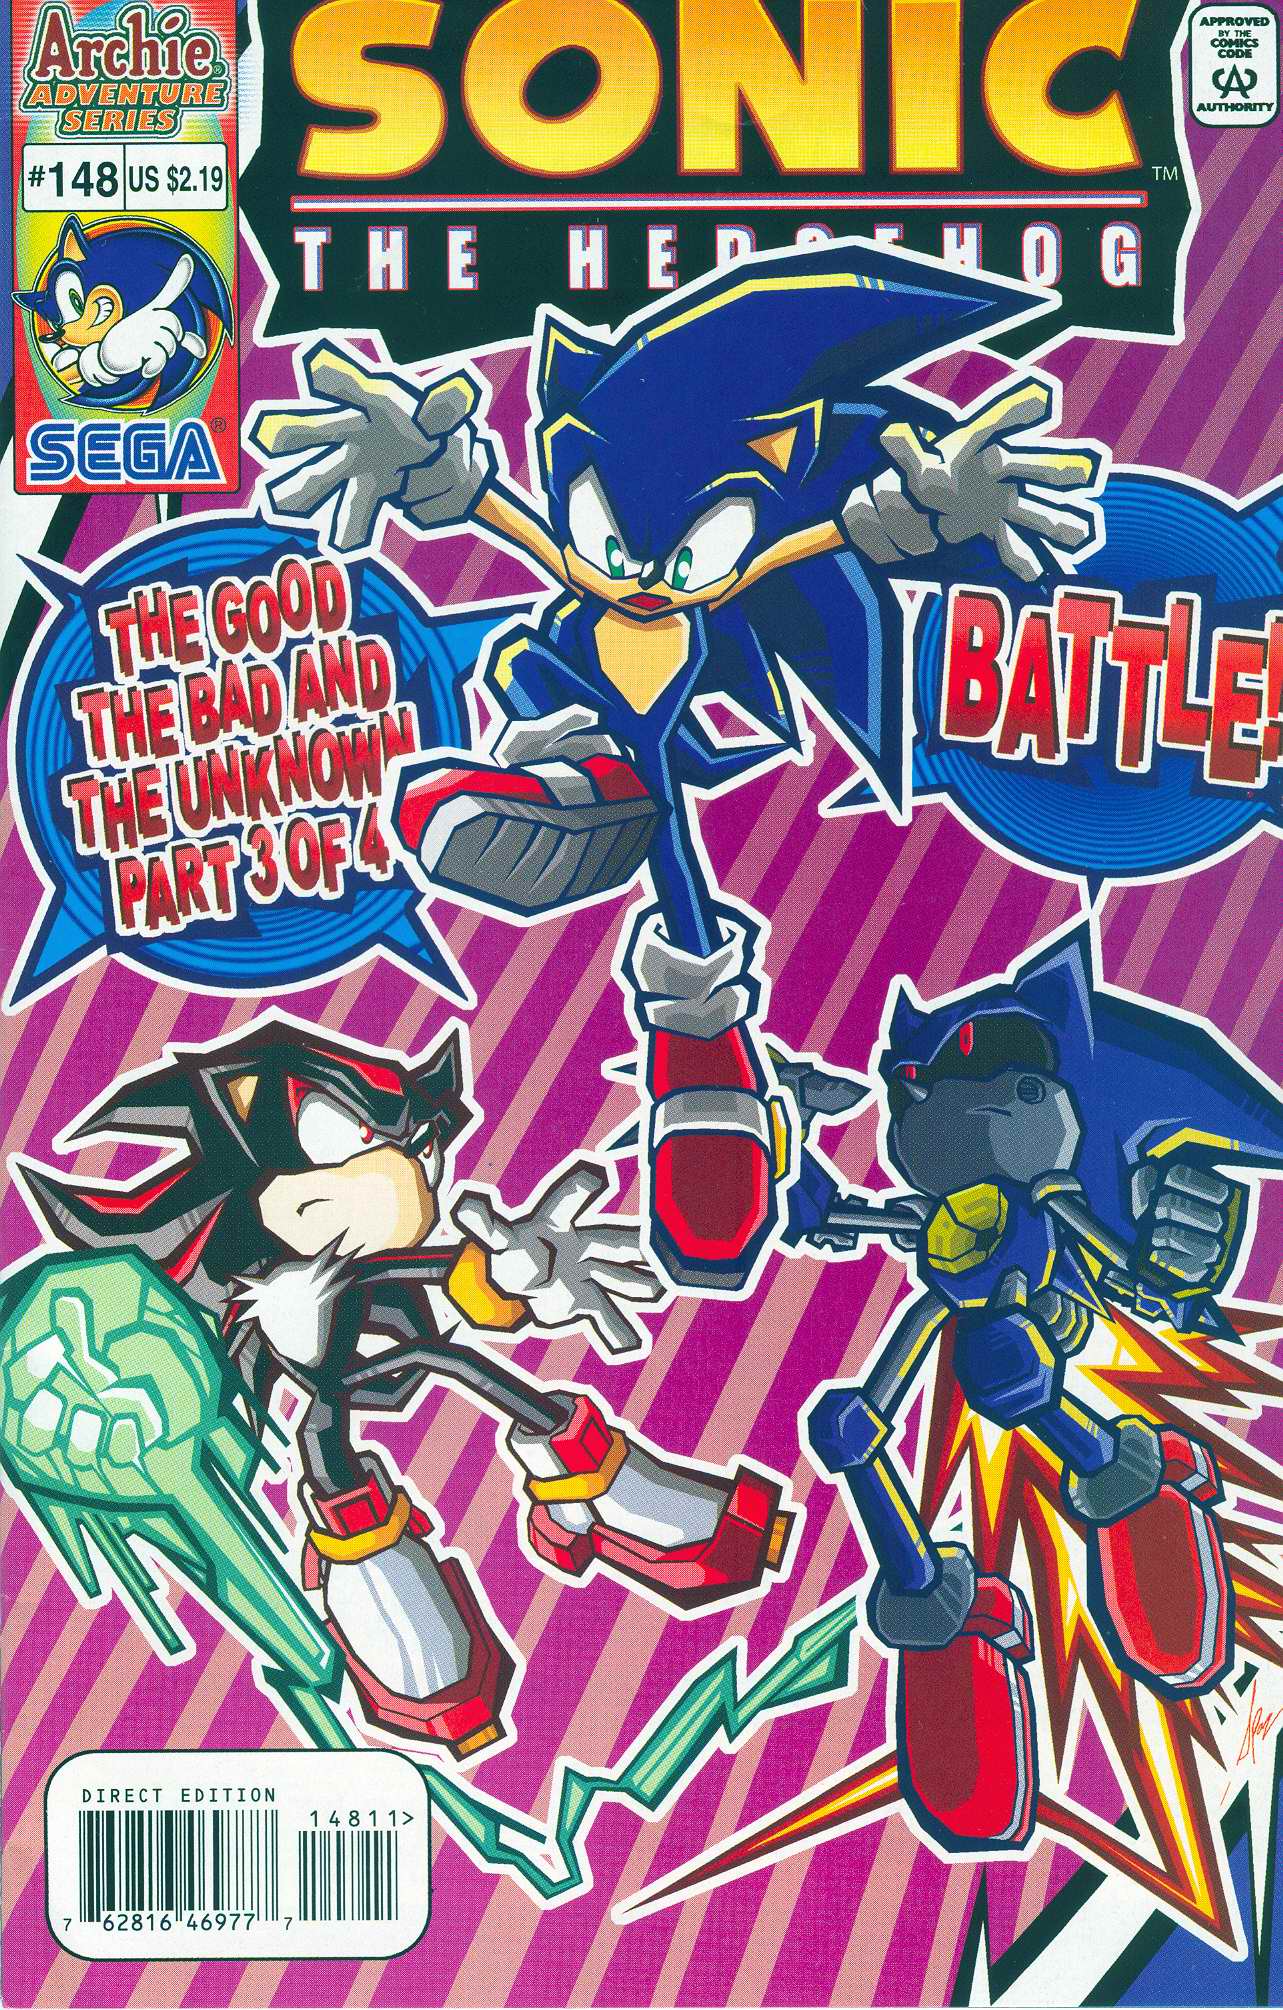 Sonic - Archie Adventure Series June 2005 Comic cover page